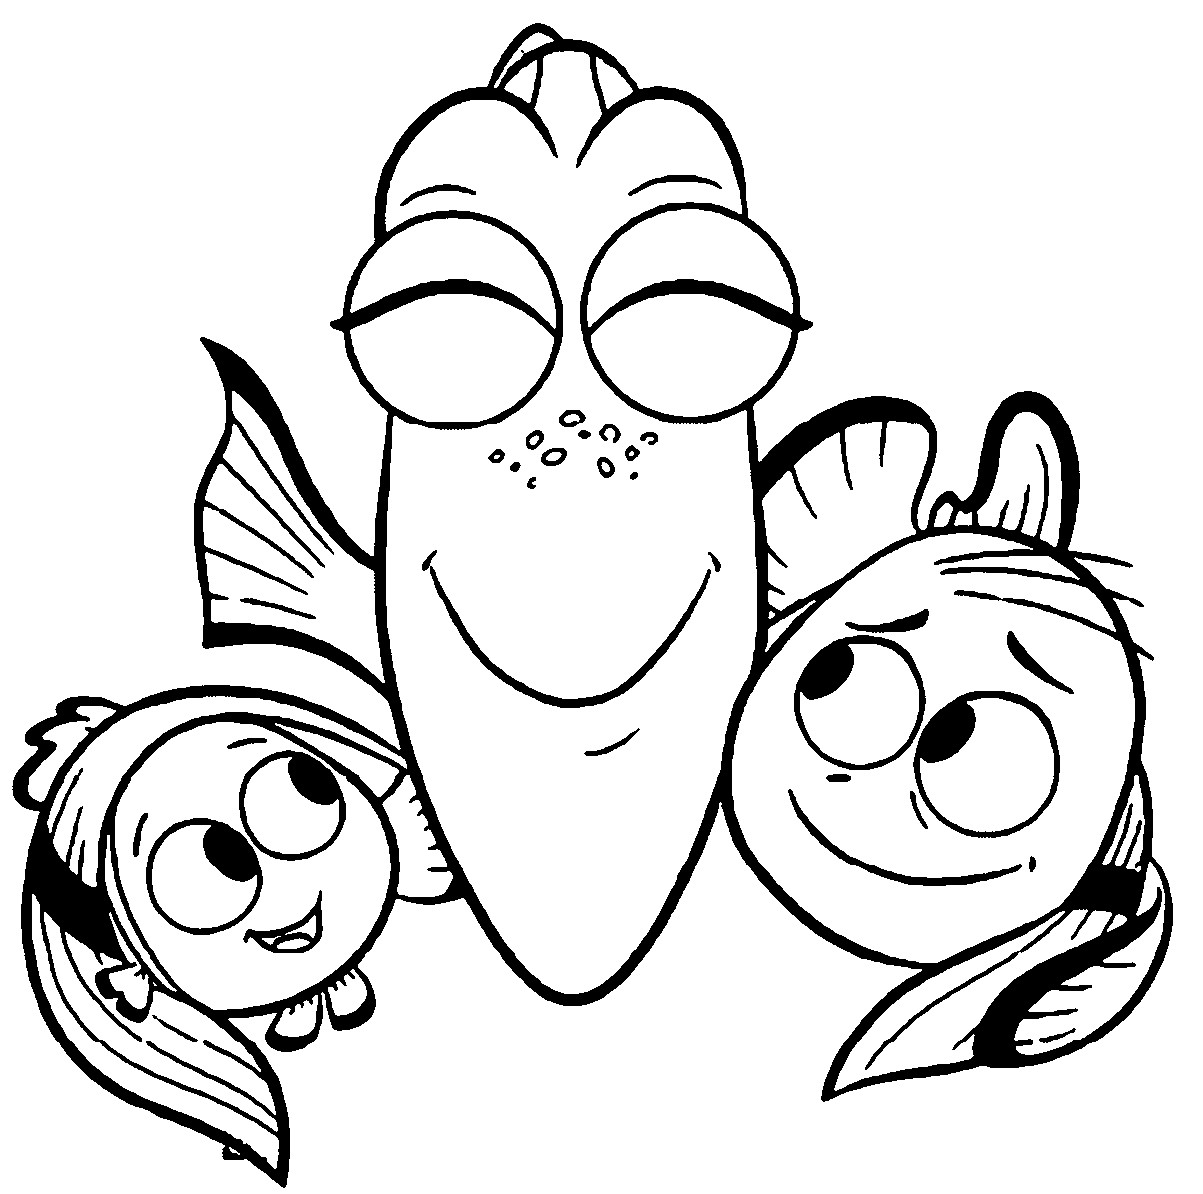 Printable Coloring Pages Kids
 Dory Coloring Pages Best Coloring Pages For Kids